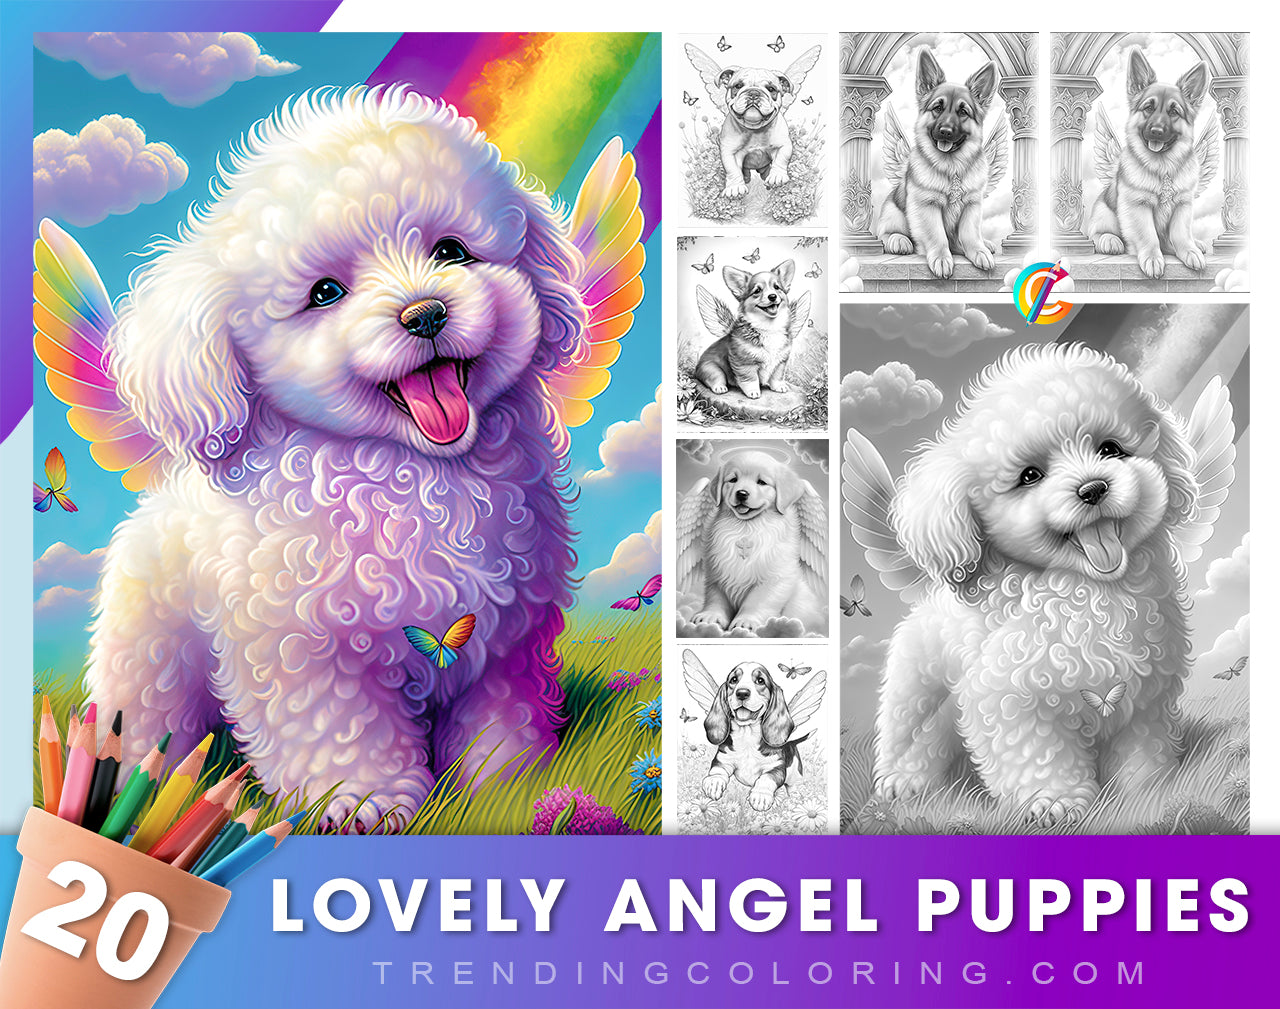 20 Lovely Angel Puppies Grayscale Coloring Pages - Instant Download - Printable Dark/Light